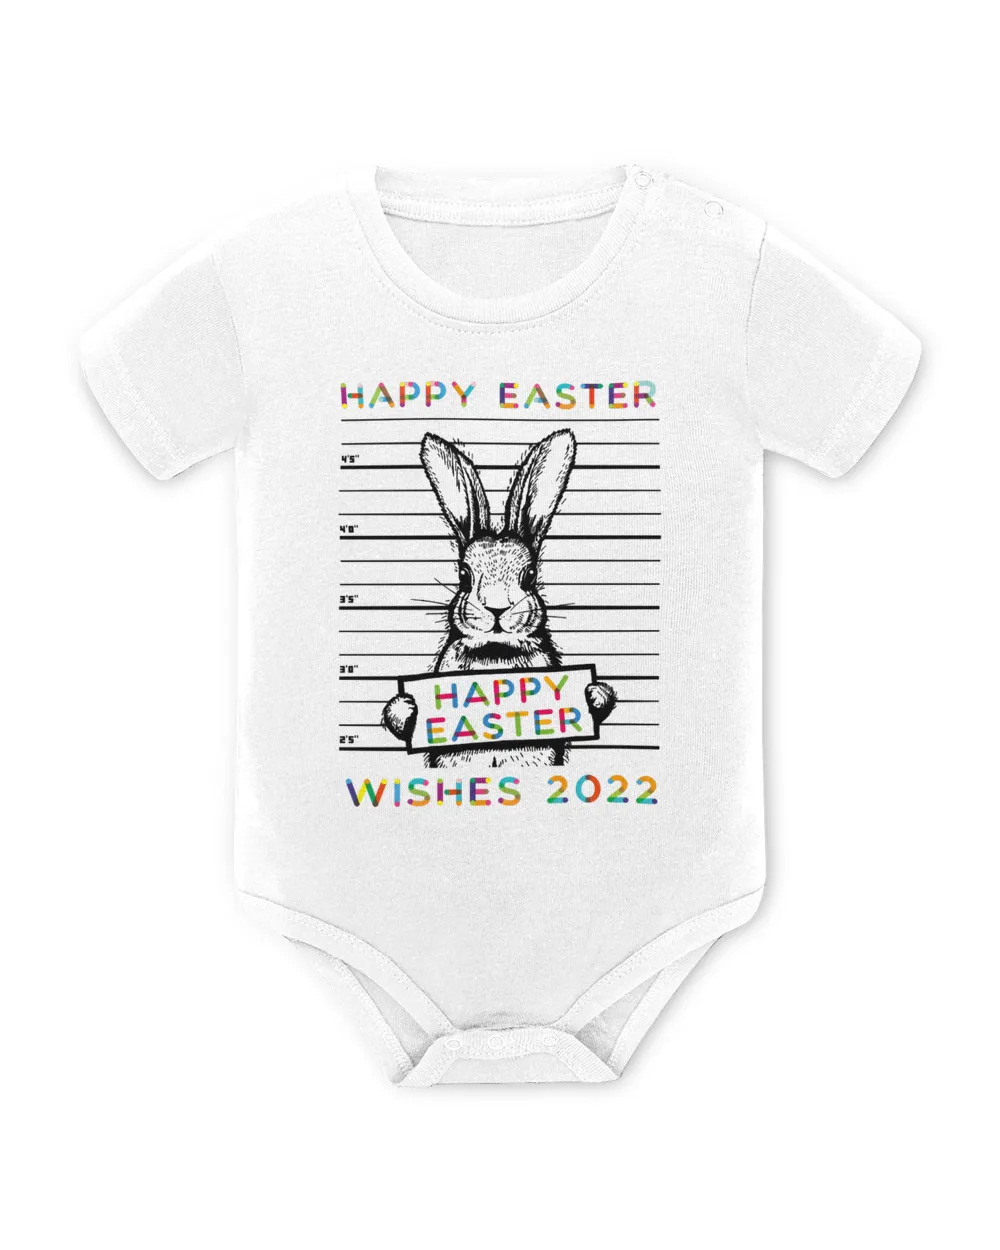 Happy Easter Wishes 2022 Funny Cute Bunny Rabbit Police Scene Illustration Classic T-Shirt